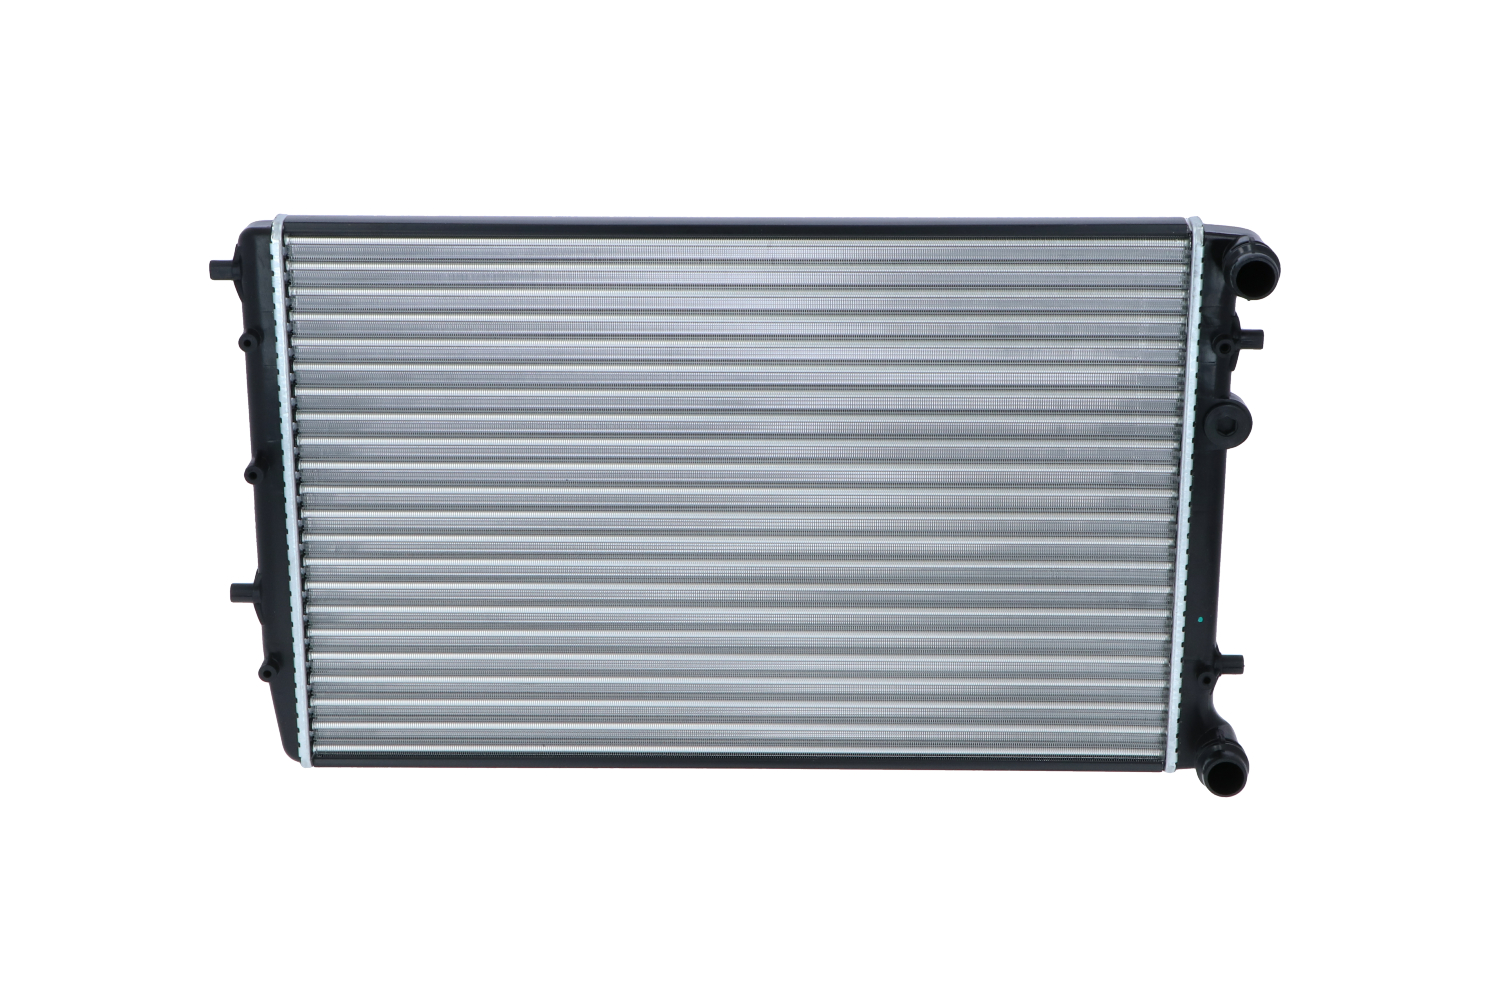 NRF 50542 Engine radiator Aluminium, 635 x 415 x 23 mm, Mechanically jointed cooling fins